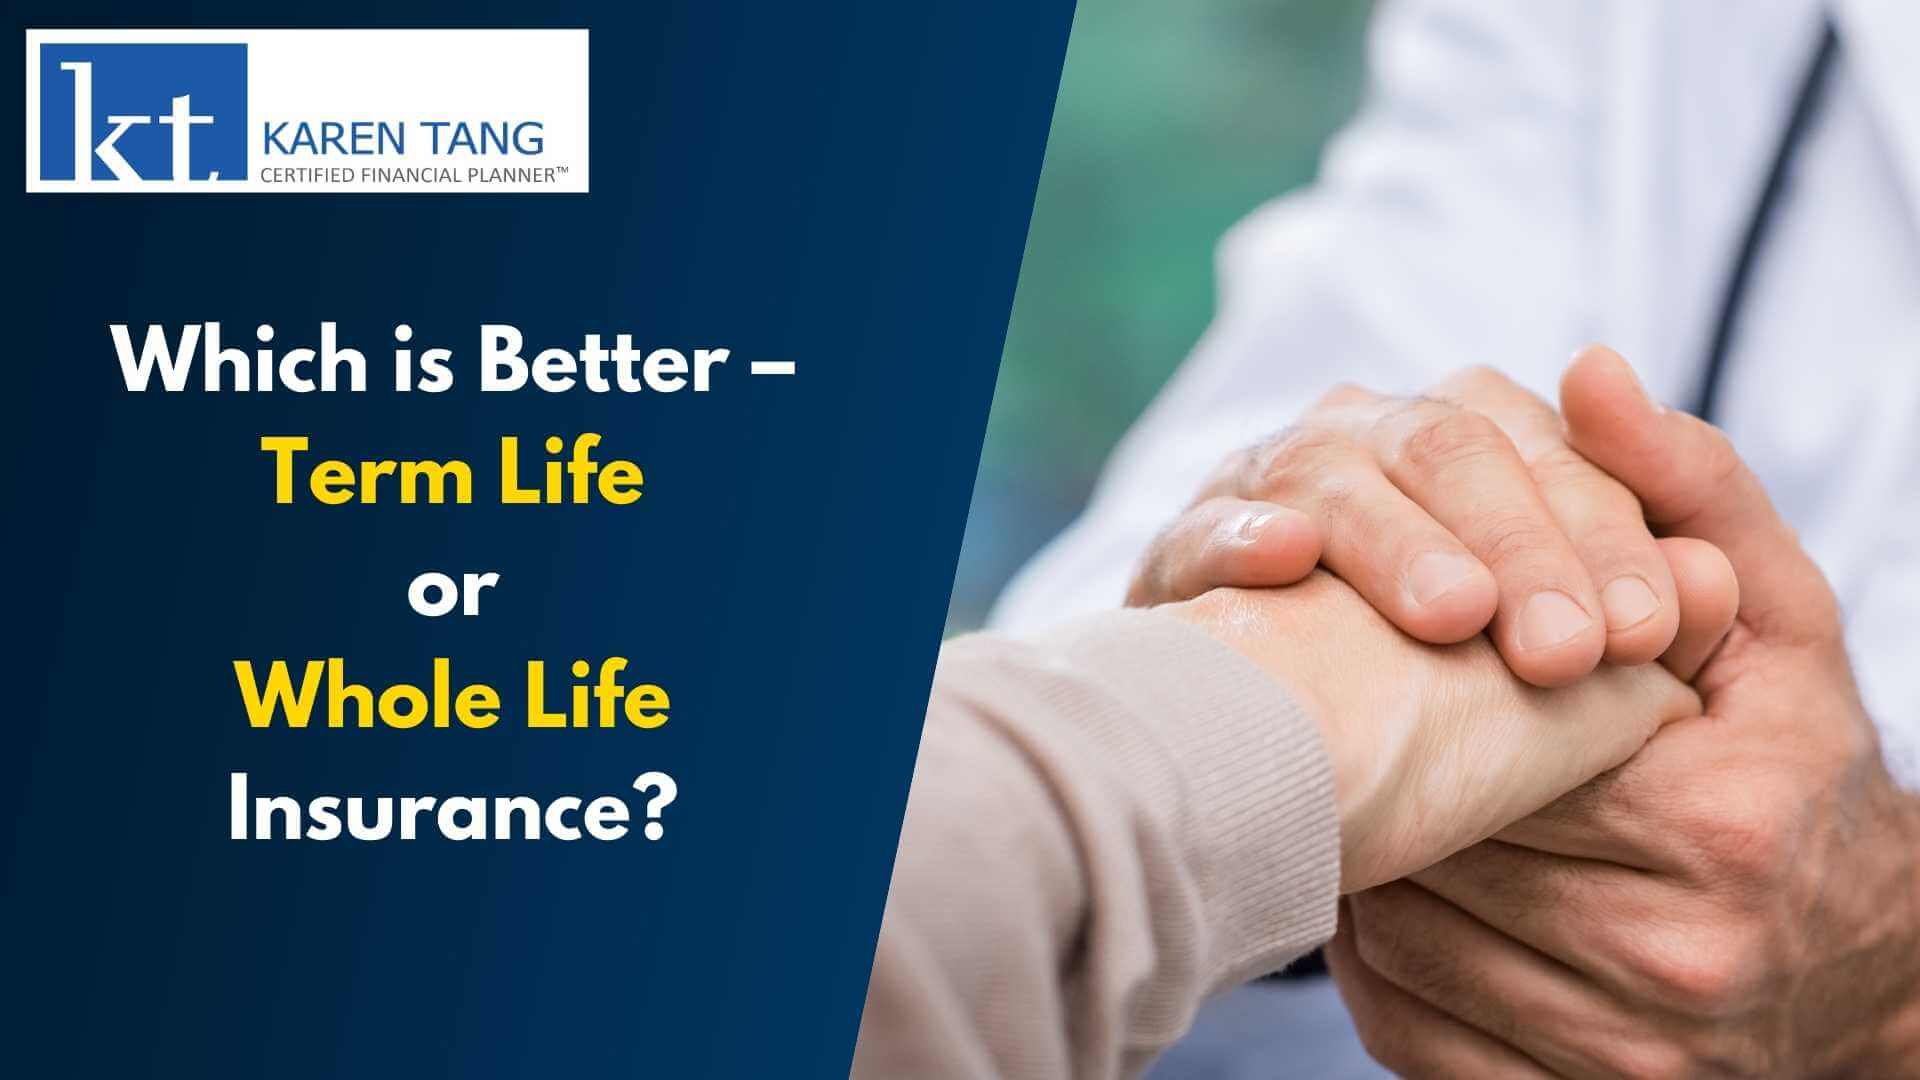 Which is Better - Term Life or Whole Life Insurance in Singapore?